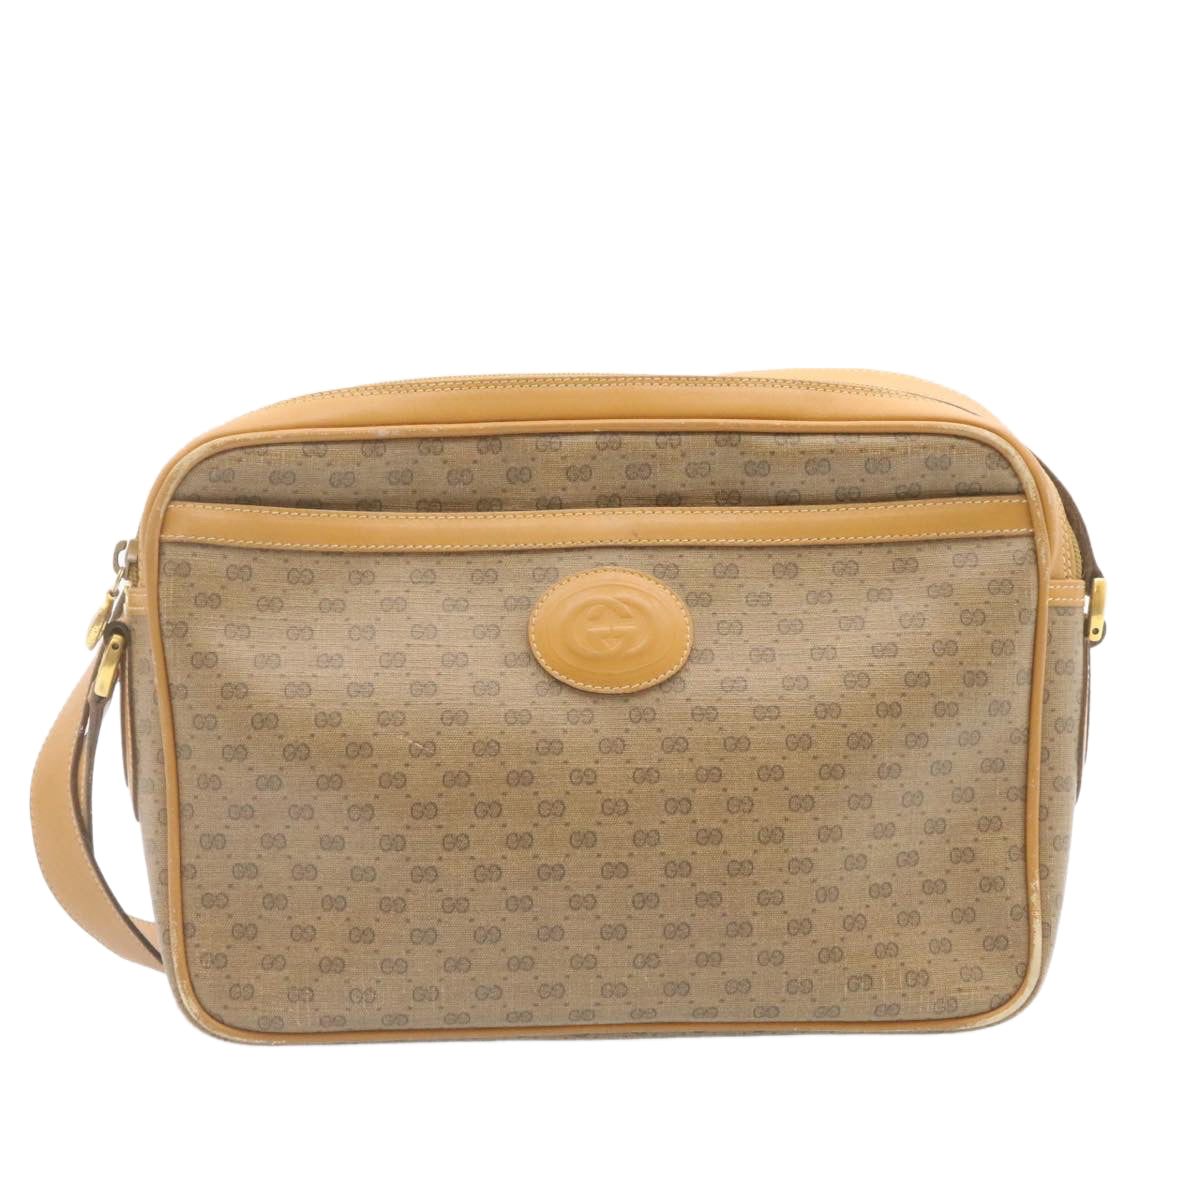 GUCCI Micro GG Canvas Cross body Shoulder Bag PVC Leather Beige Auth am1195g